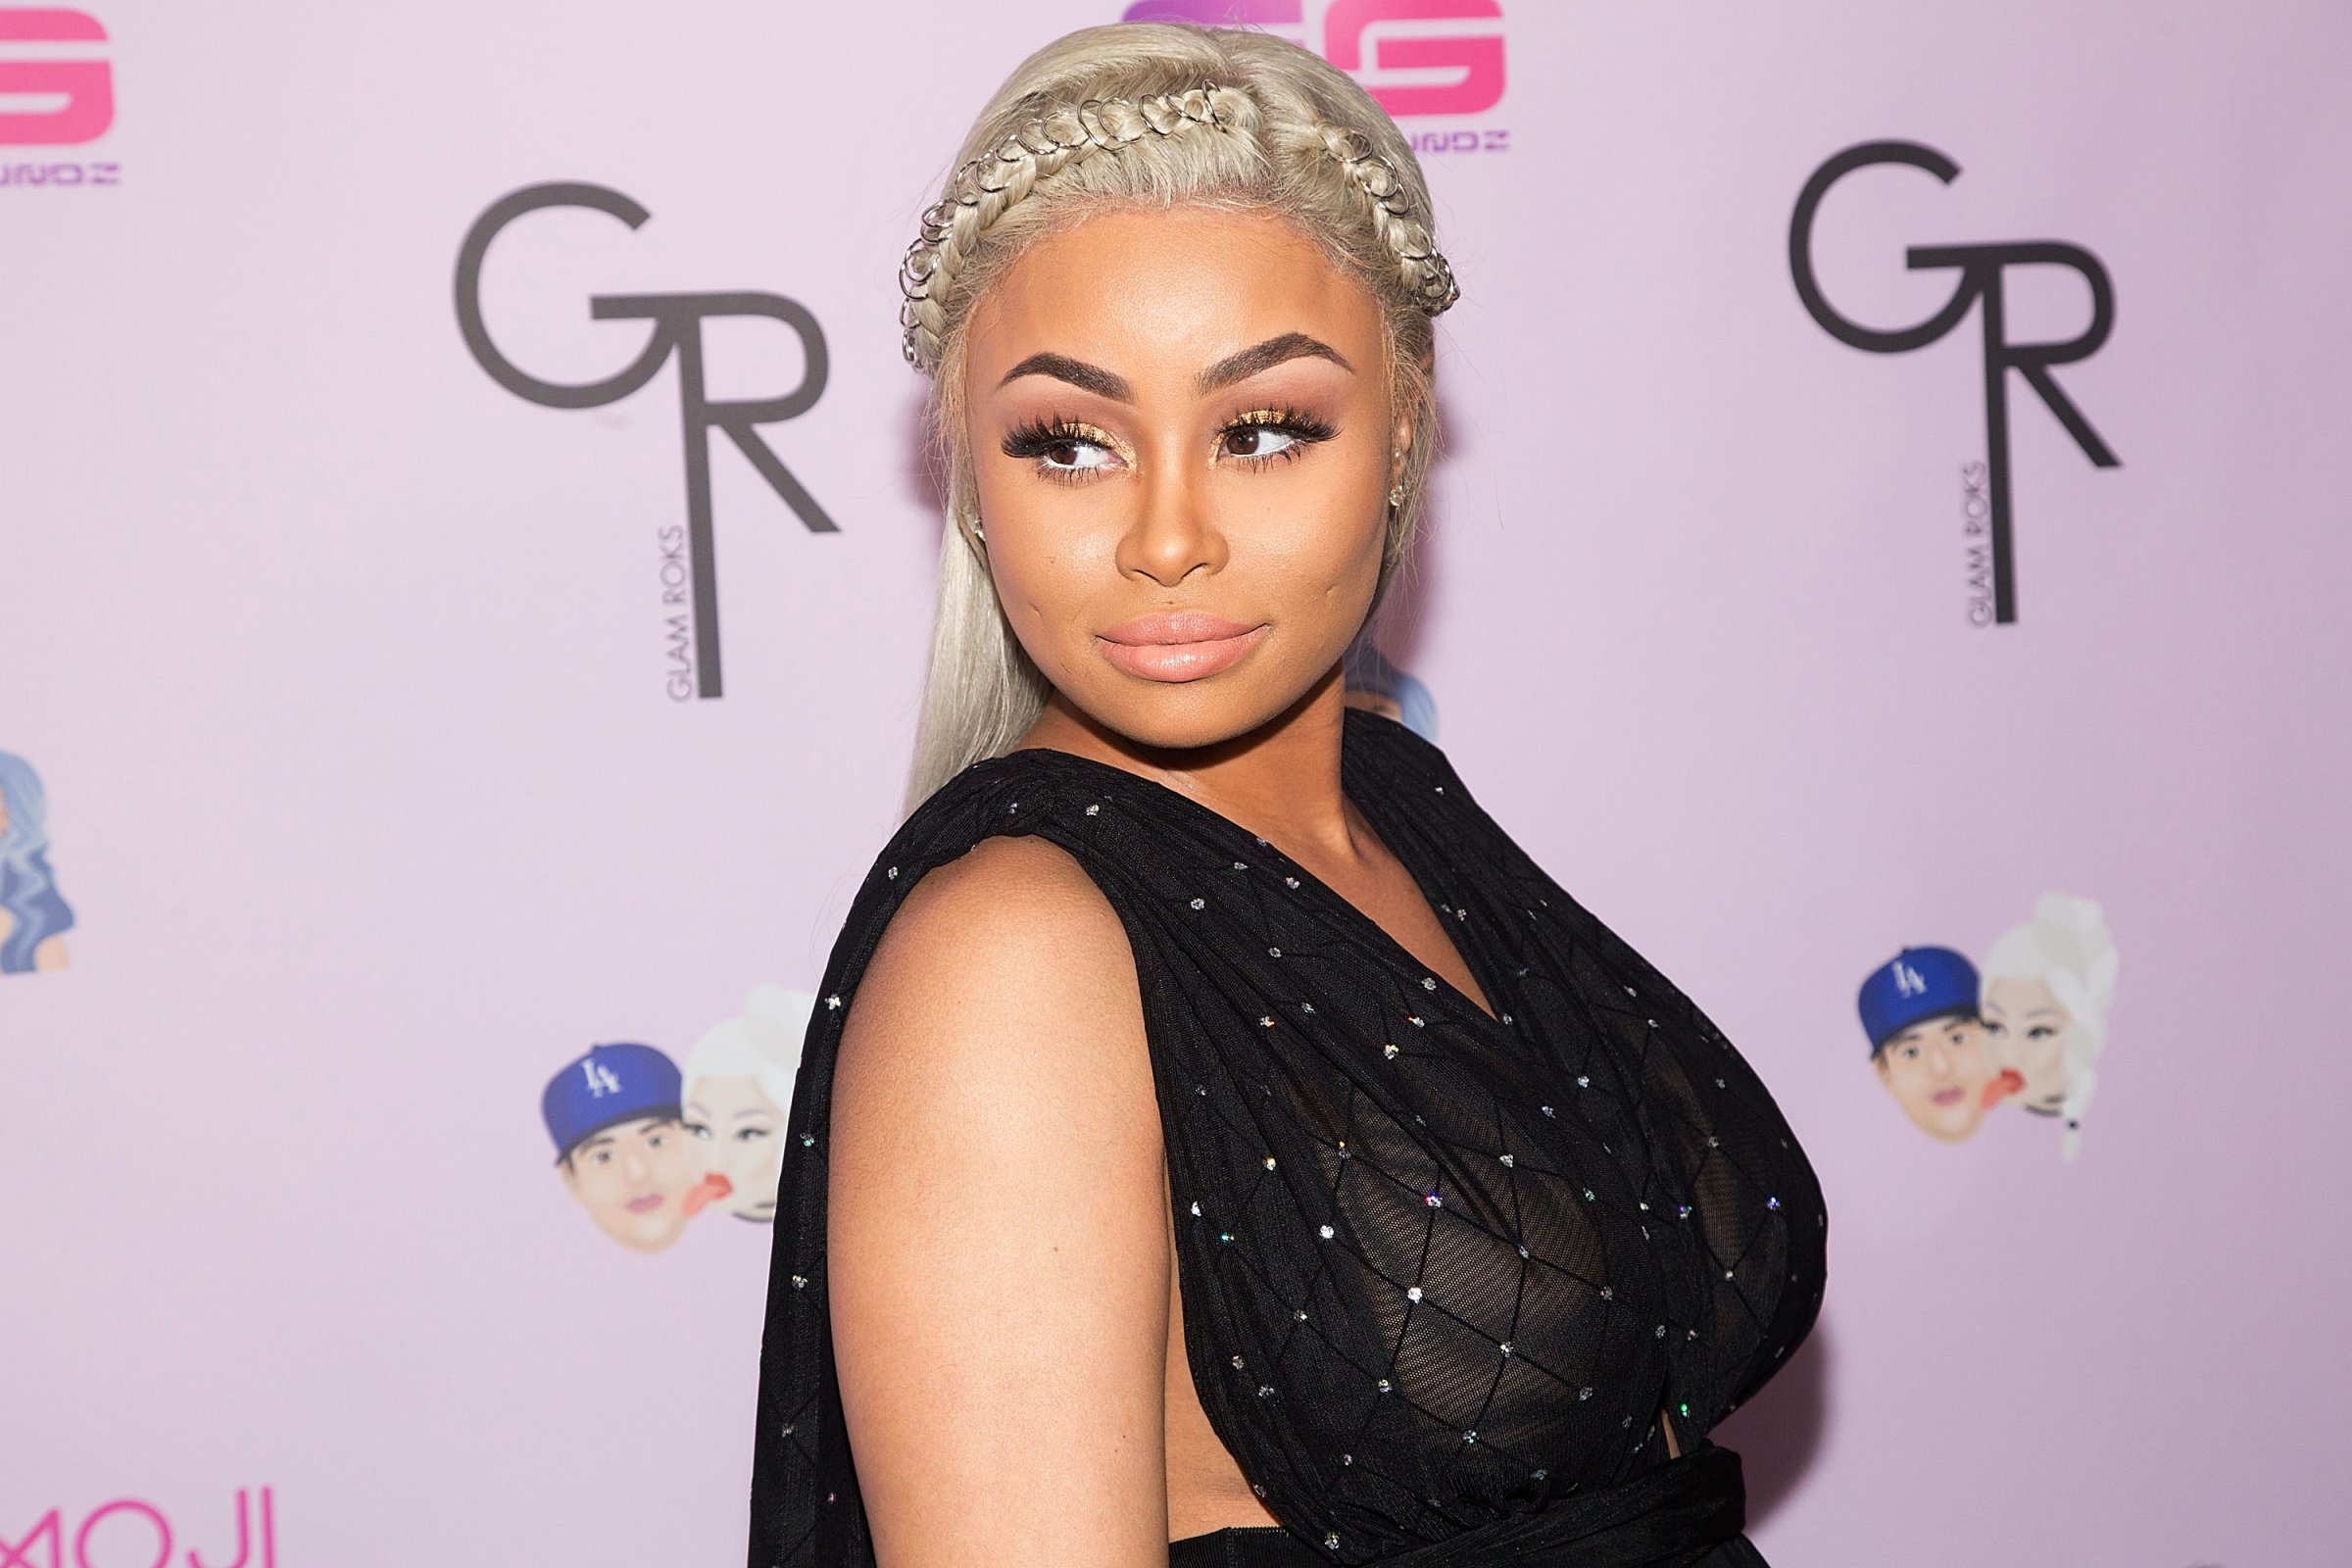 Blac Chyna arrives for her birthday celebration and unveiling of her "Chymoji" Emoji Collection at Hard Rock Cafe, Hollywood, CA on May 10, 2016 in Hollywood, California.